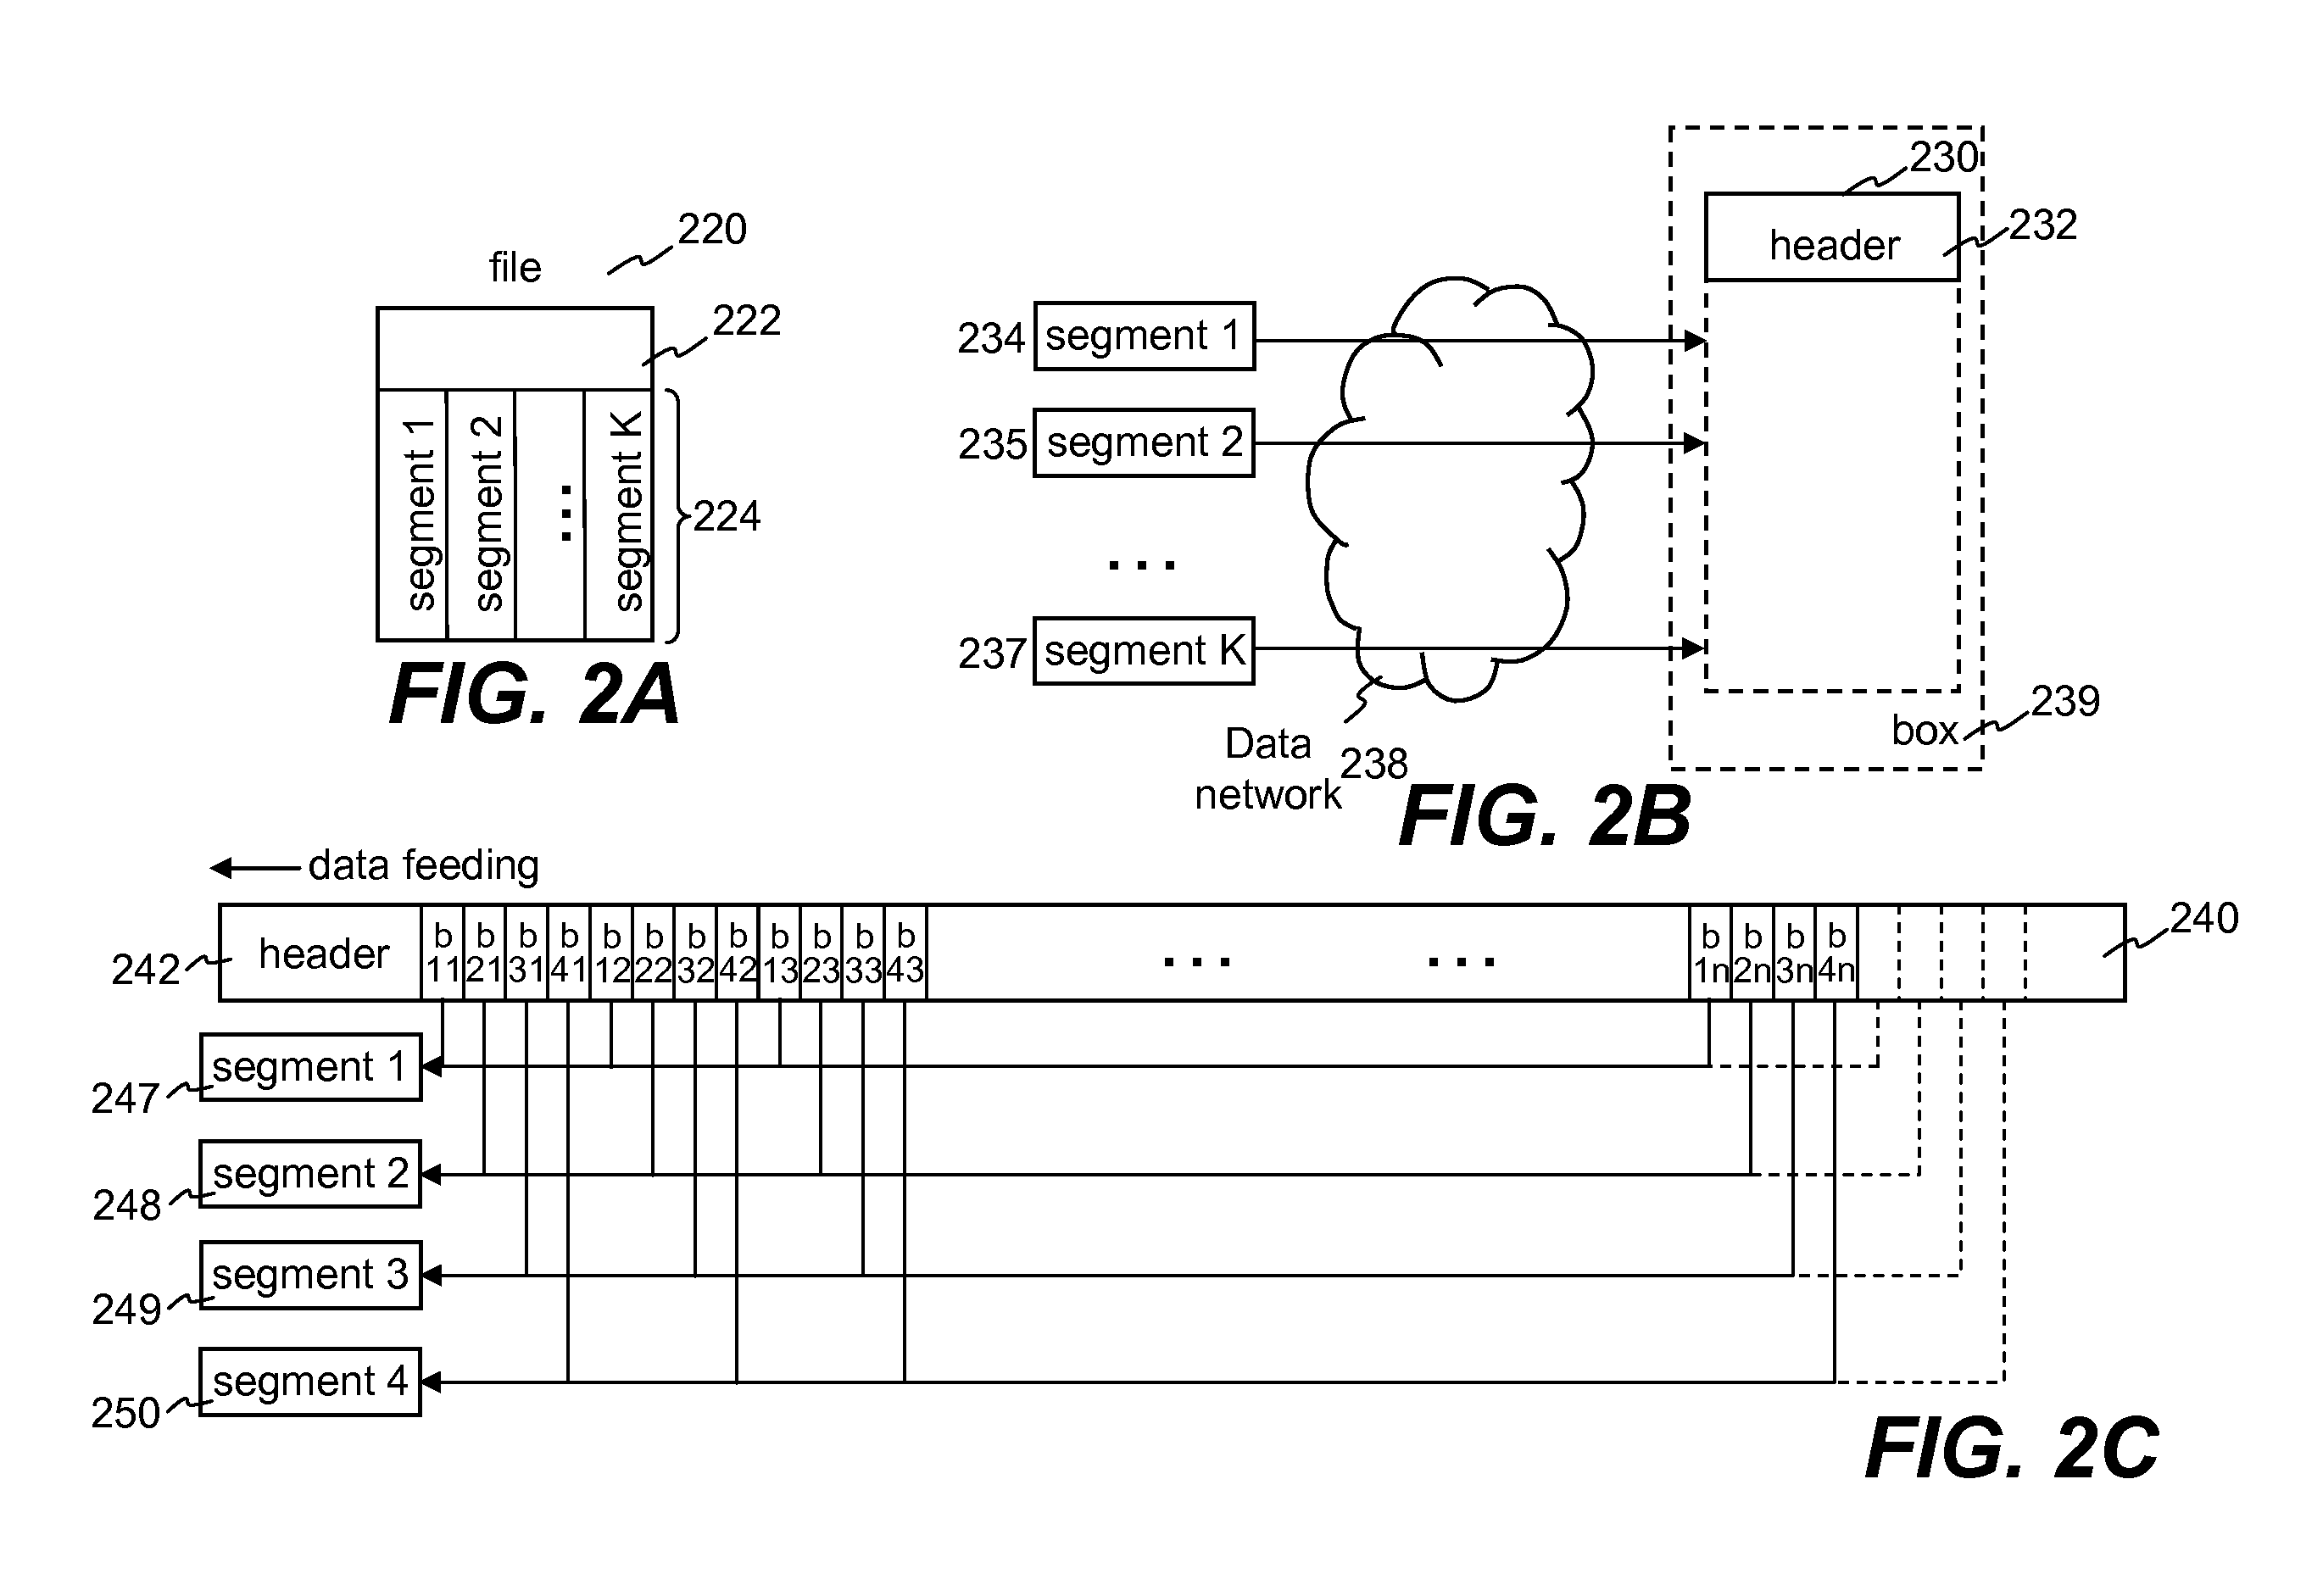 Method and apparatus for sharing media files among network nodes with respect to available bandwidths